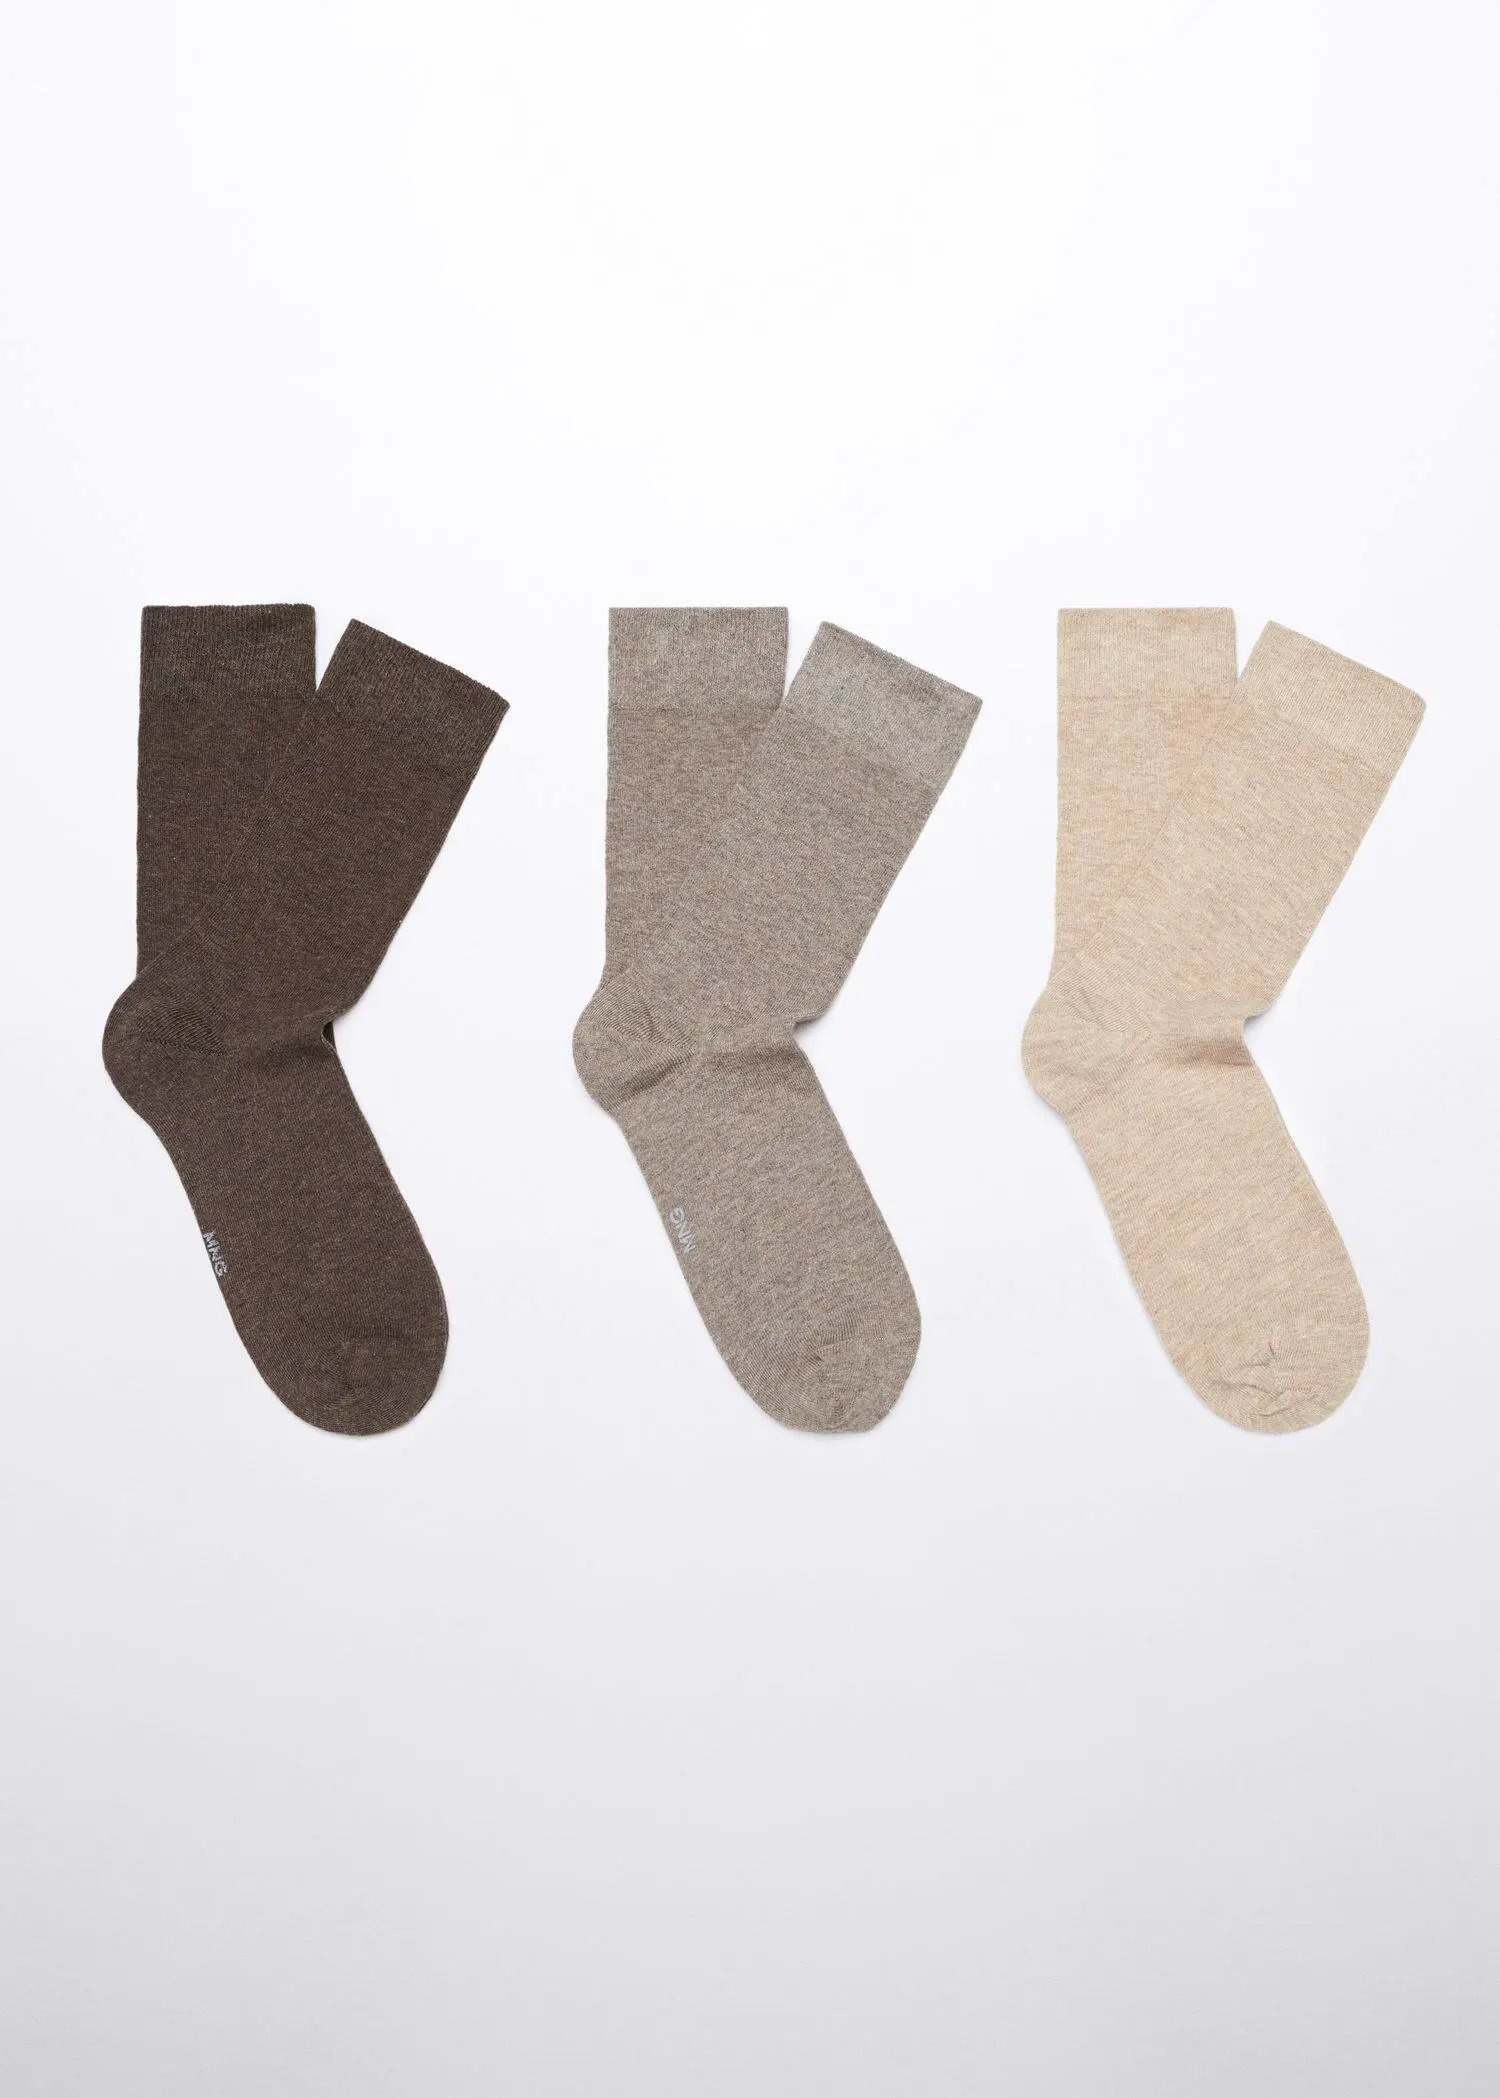 Mango Pack of 3 cotton socks. three pairs of different colored socks on top of each other. 